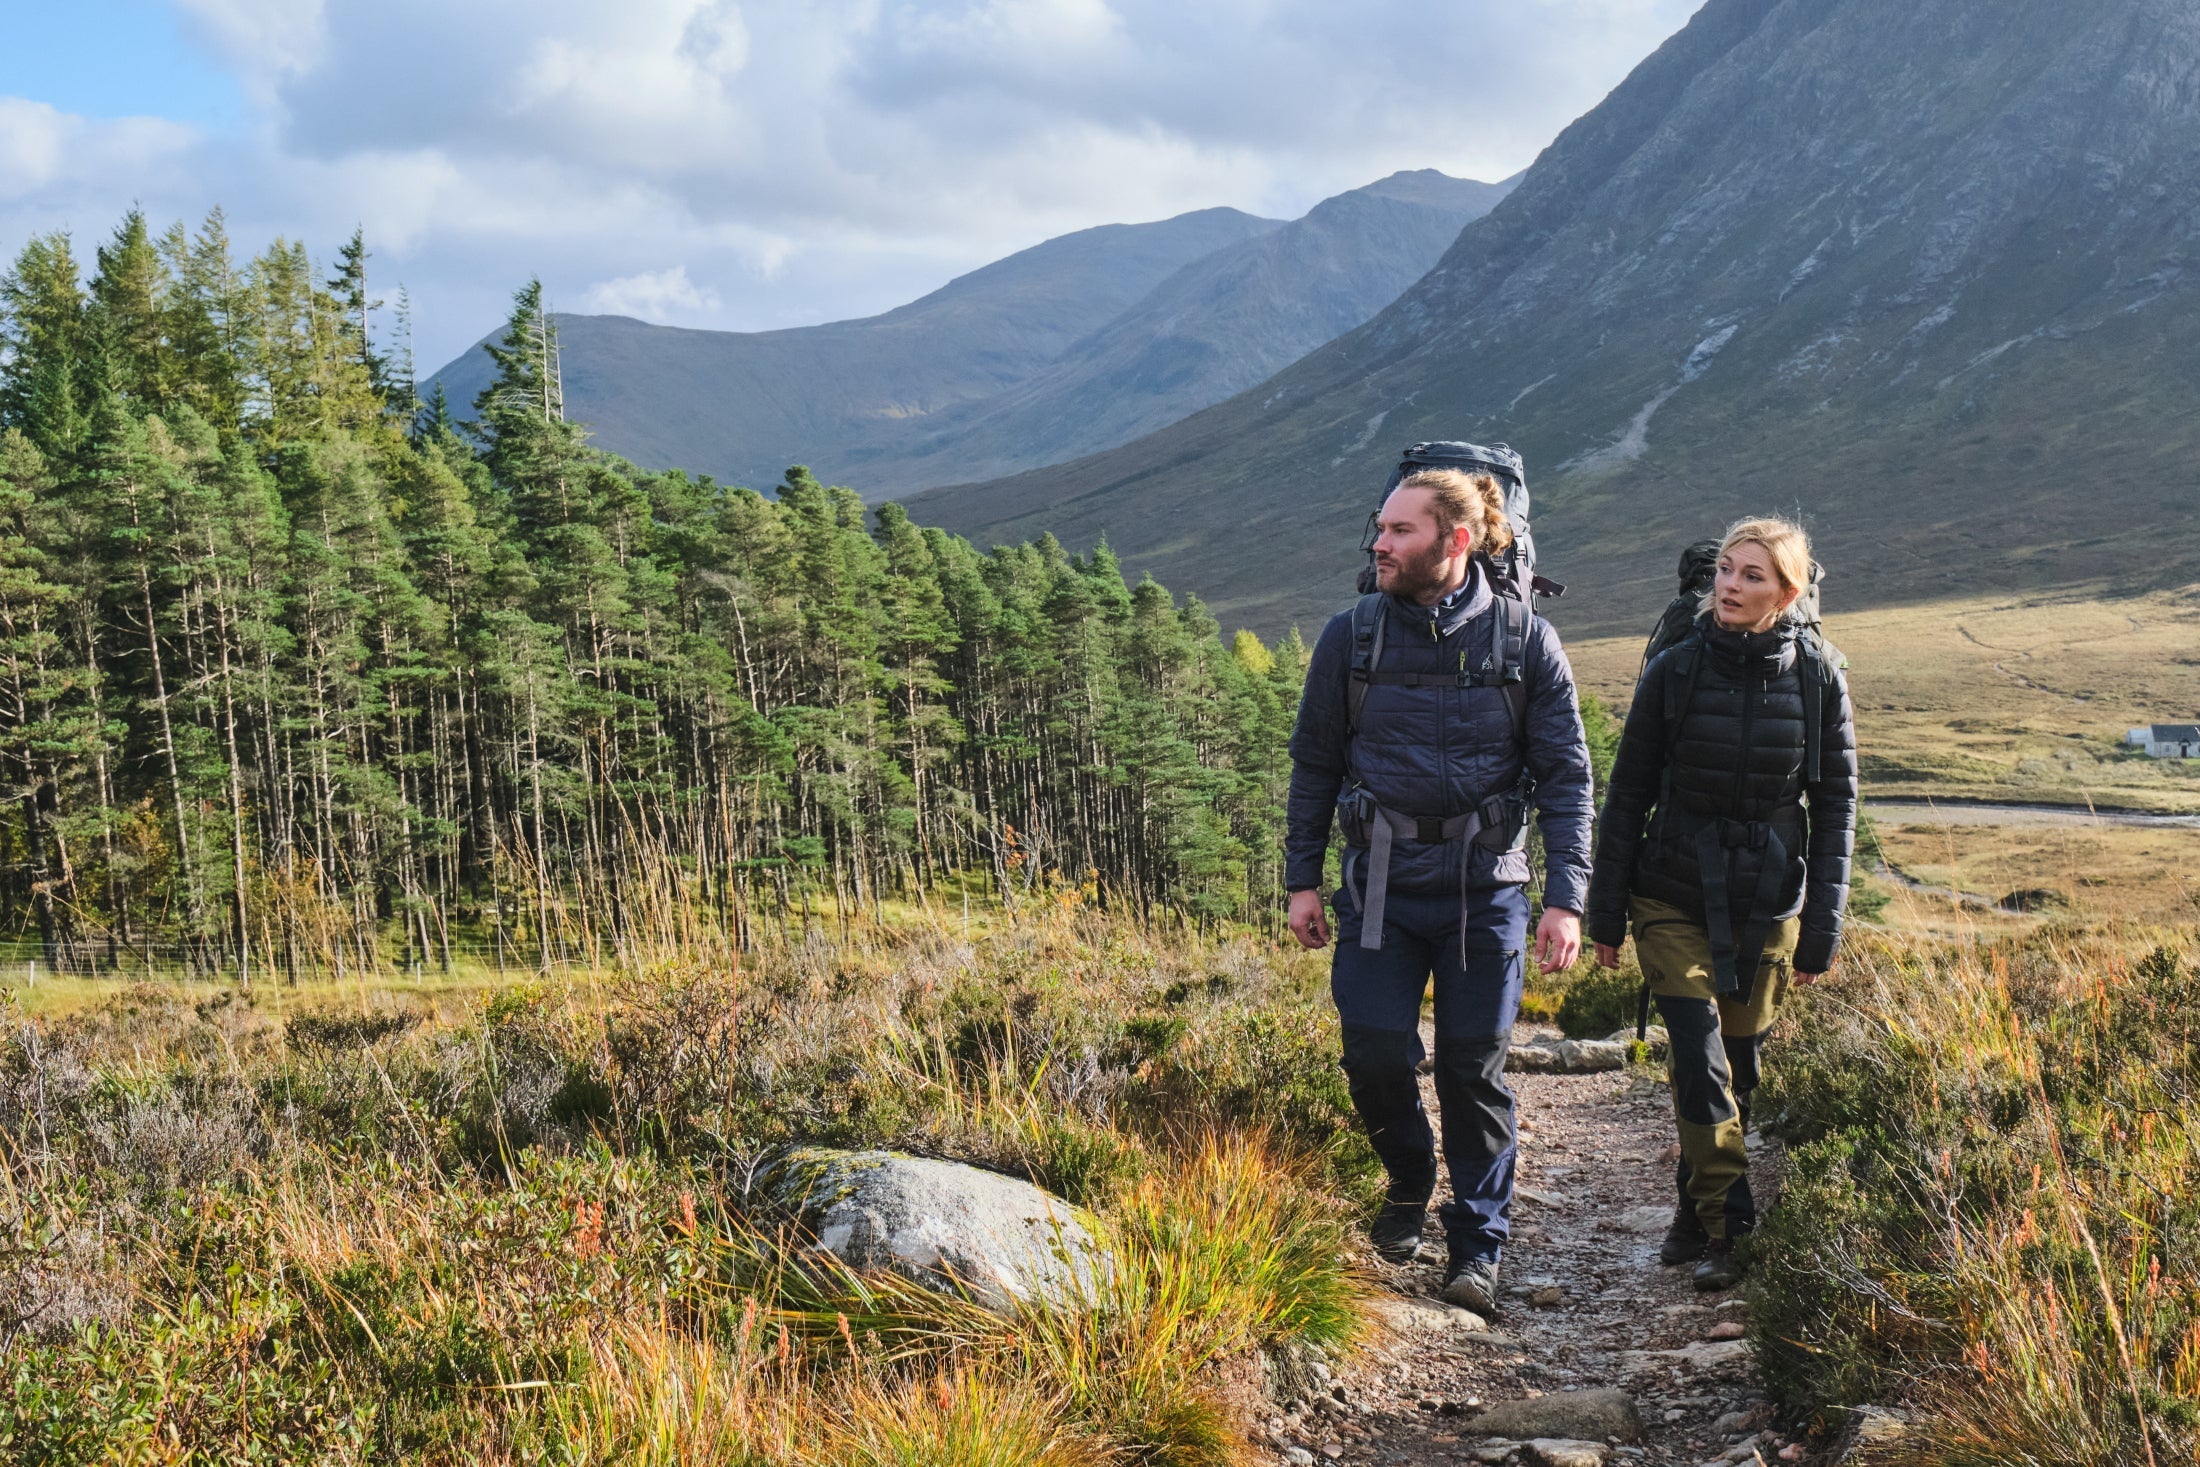 Fjern Skydda & Arktis II Insulated Jackets in use on a Highland trail